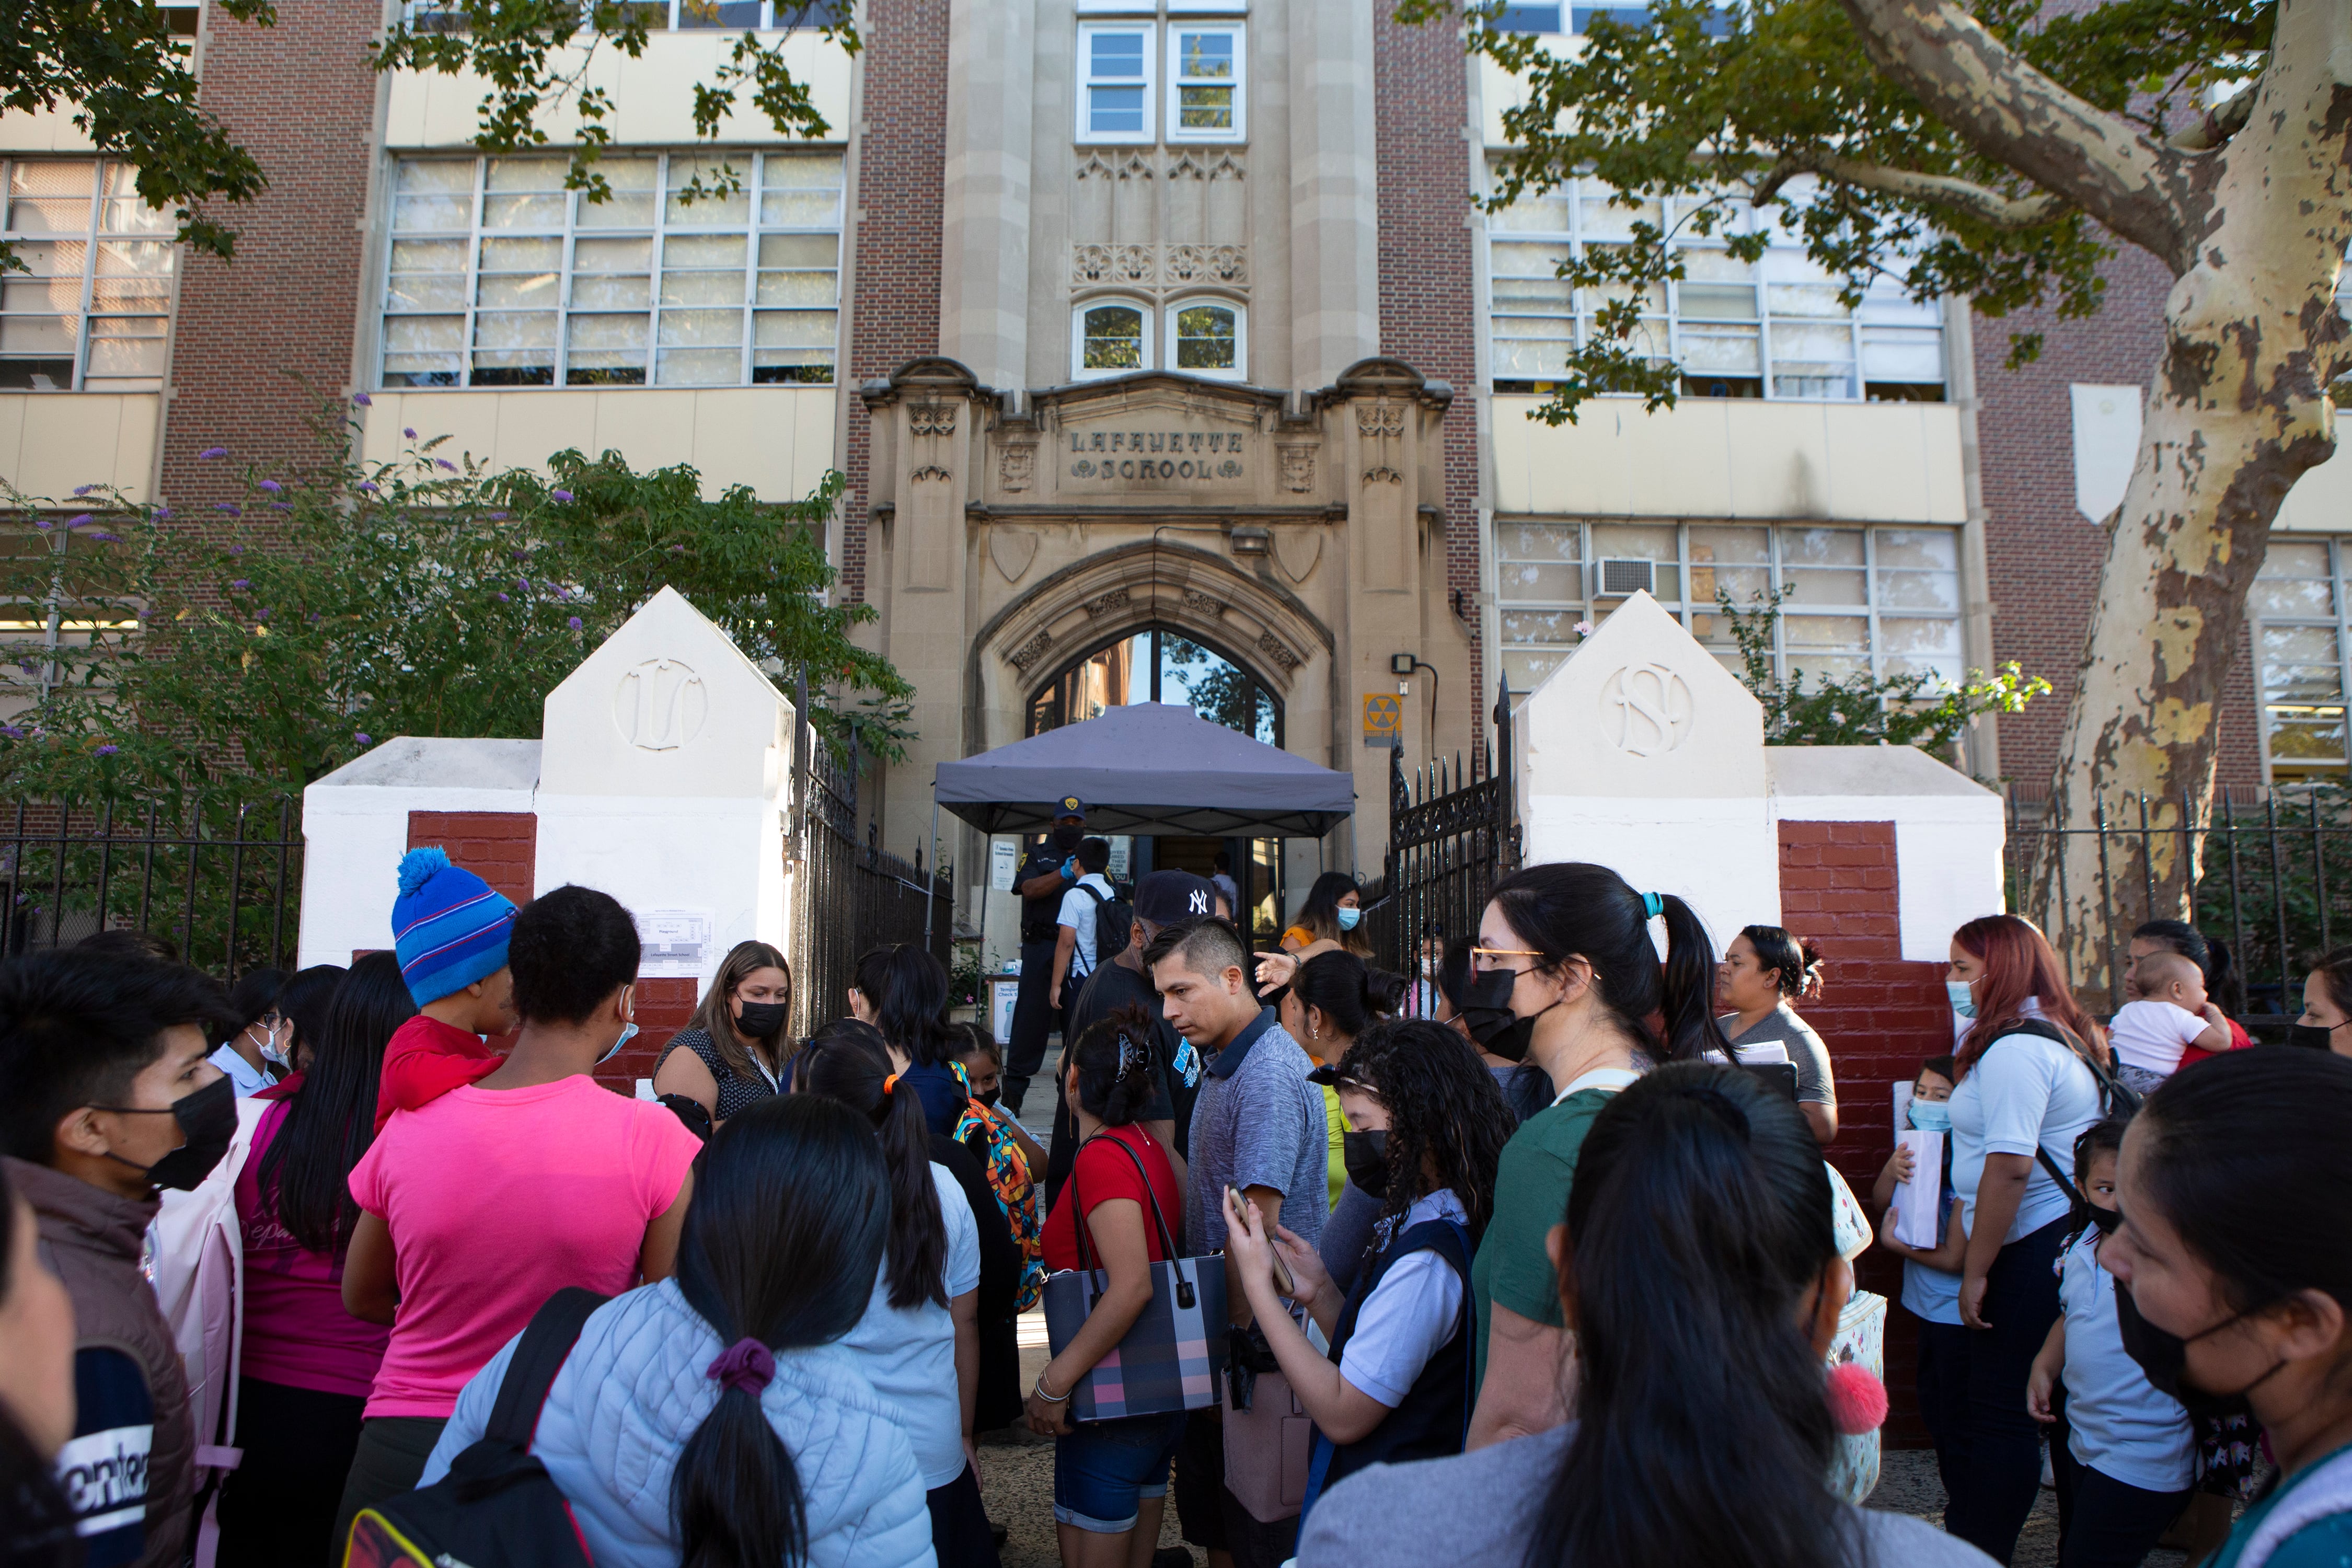 Dozens of students and parents make their way into Newark’s Lafayette Street School on the first day of classes.